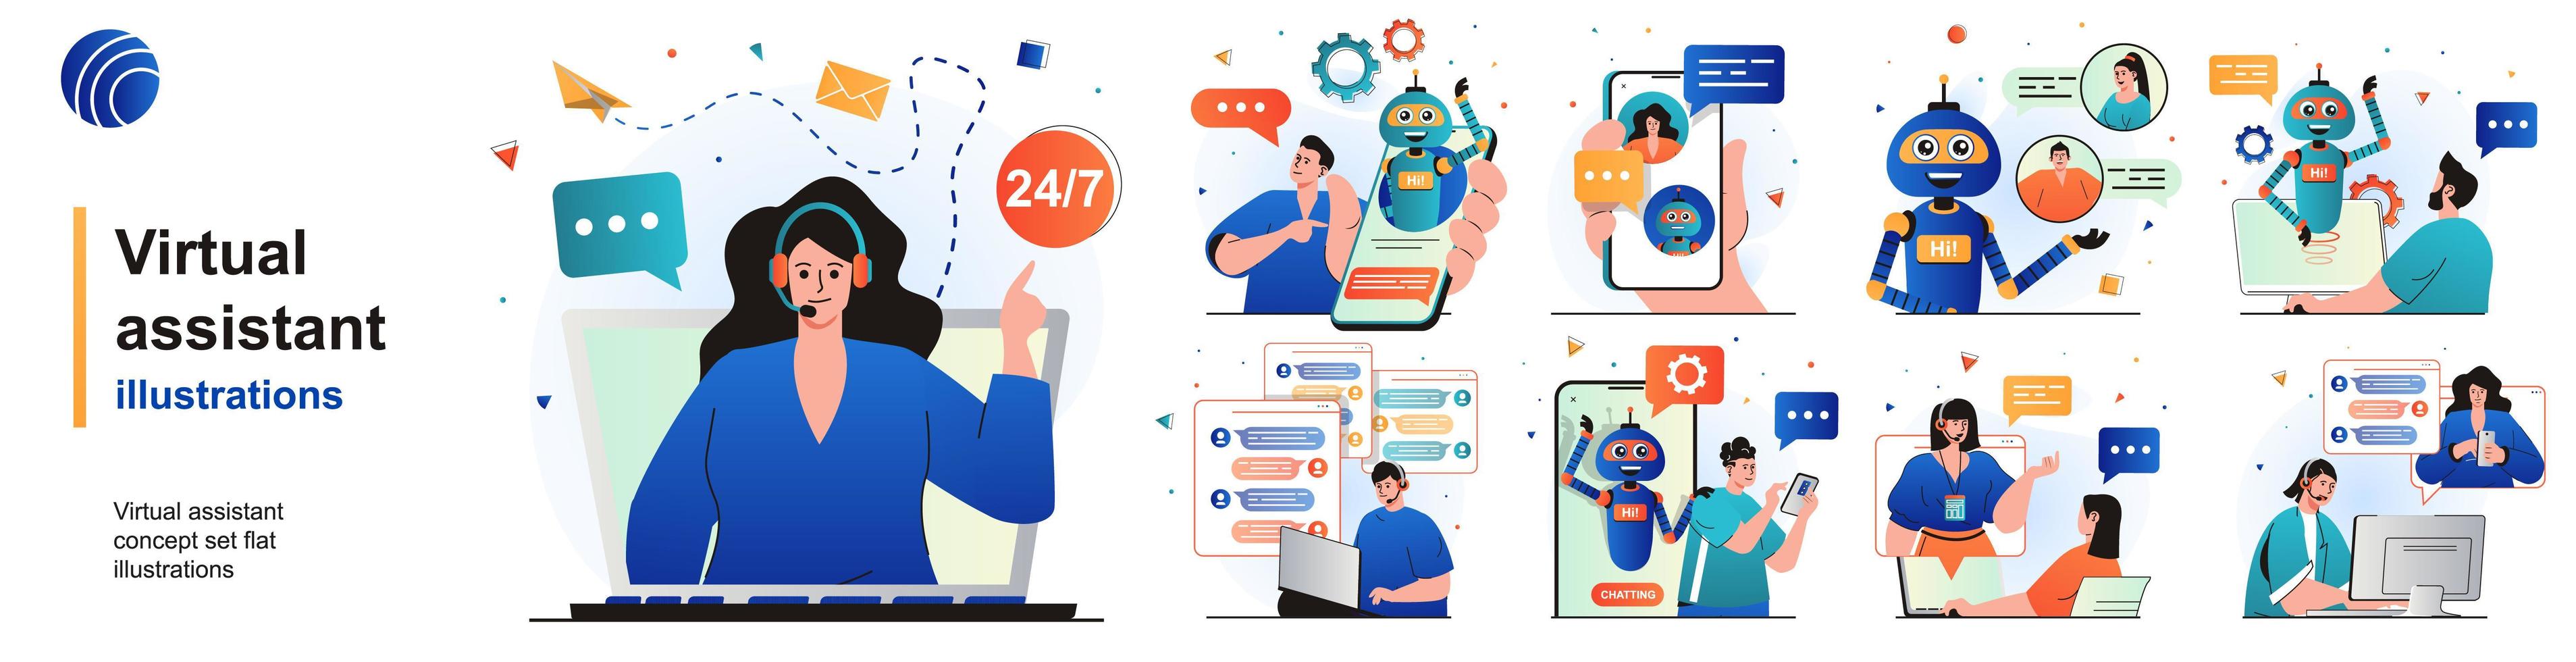 Virtual assistant isolated set. User call to hotline, online chat bot support. People collection of scenes in flat design. Vector illustration for blogging, website, mobile app, promotional materials.